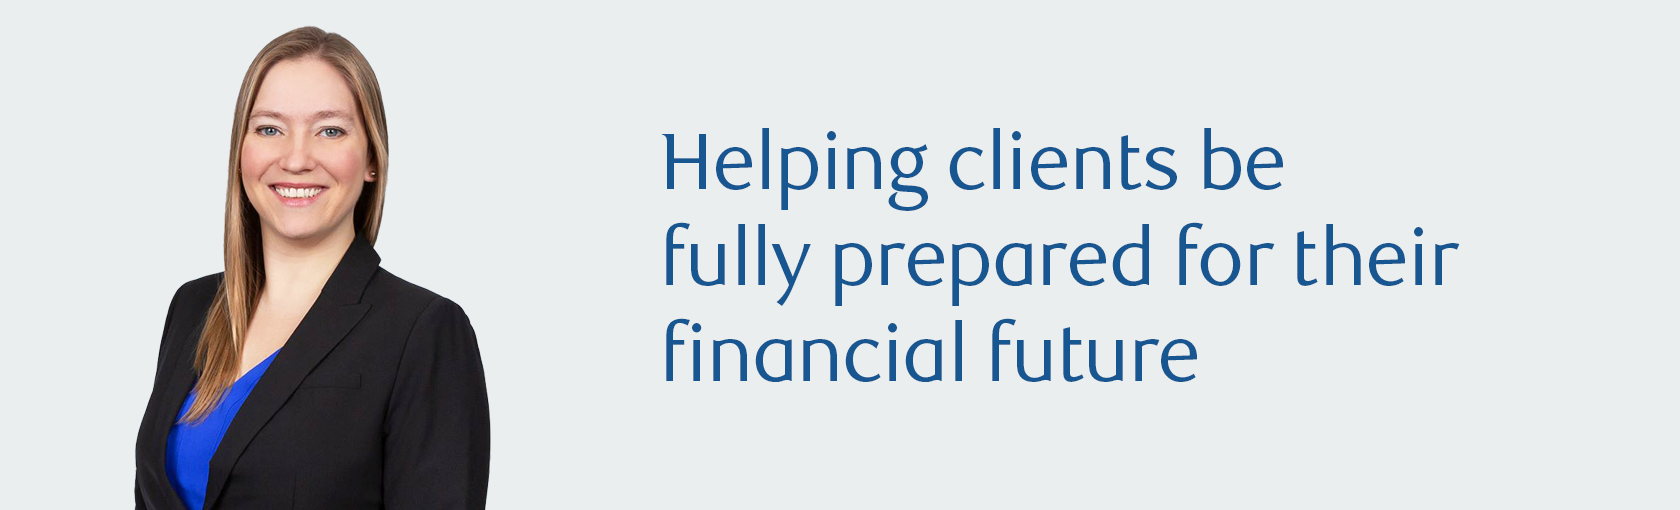 Helping clients be fully prepared for their financial future